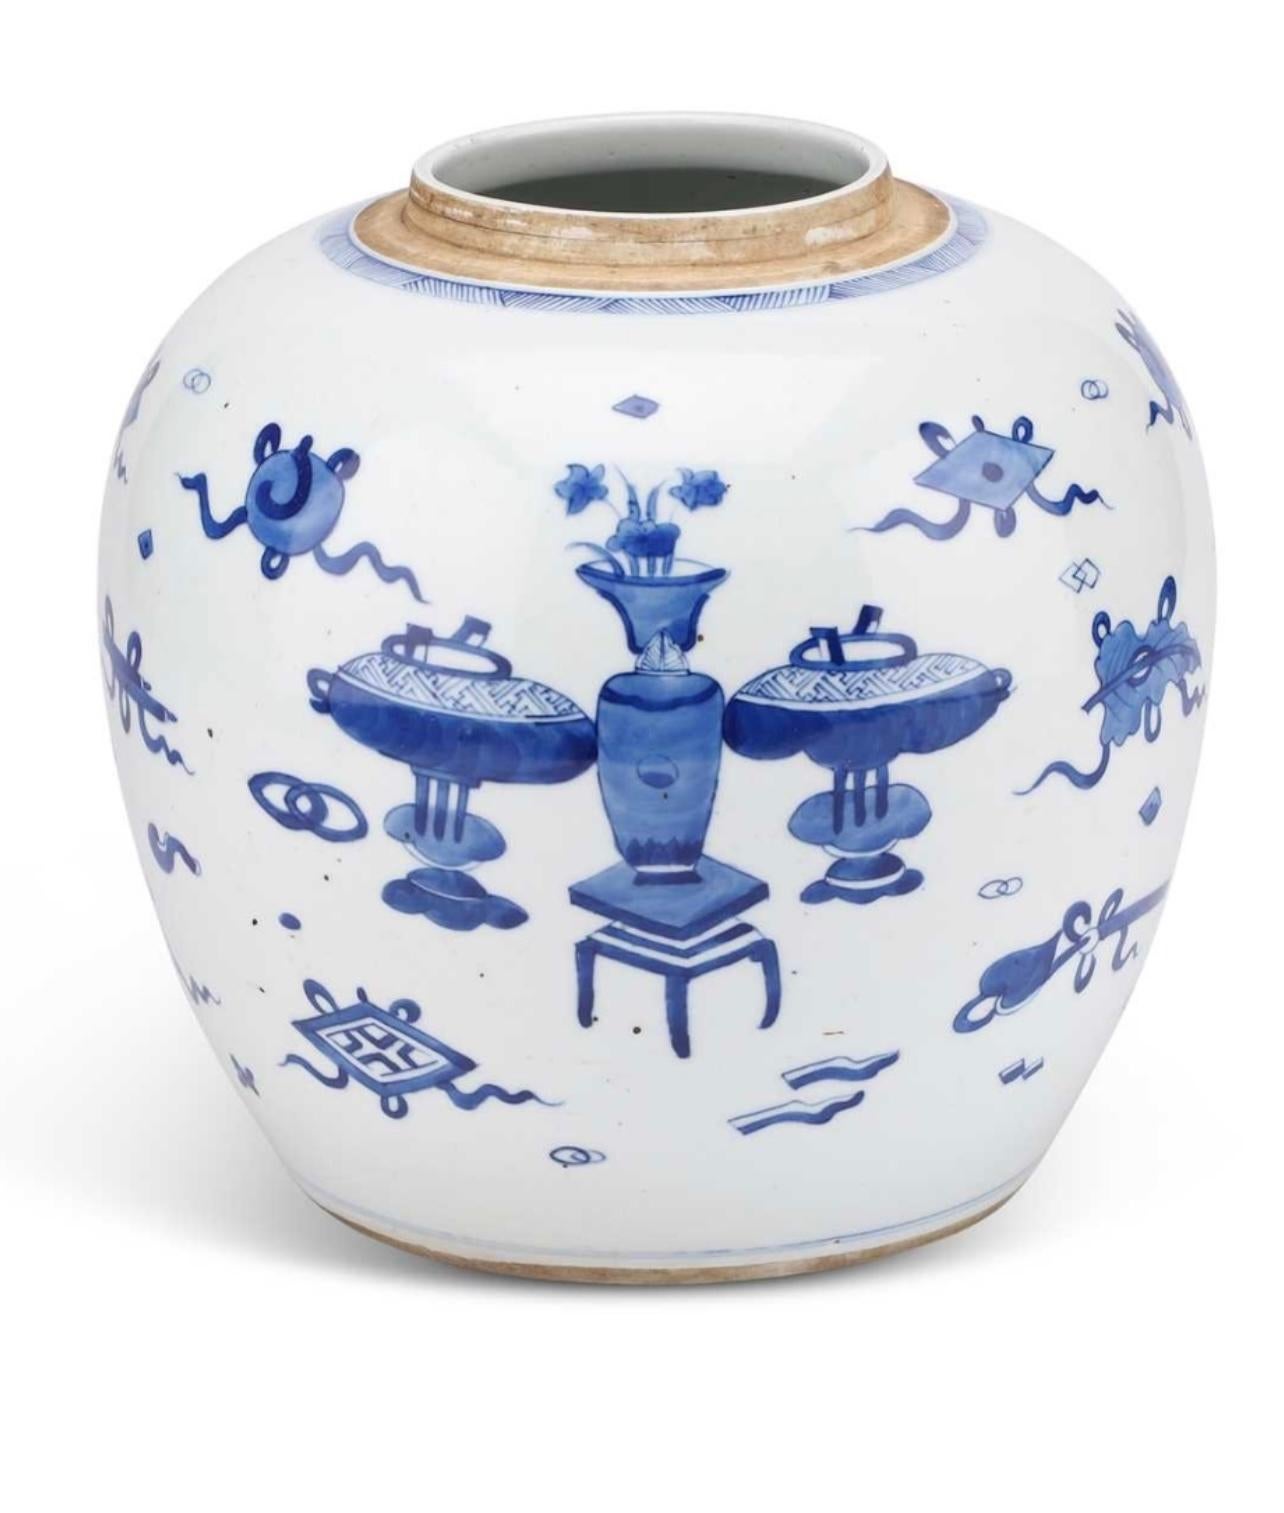 Porcelain A Very Nice Large Chinese Blue and White Ginger Jar/Vase. 19th C. For Sale